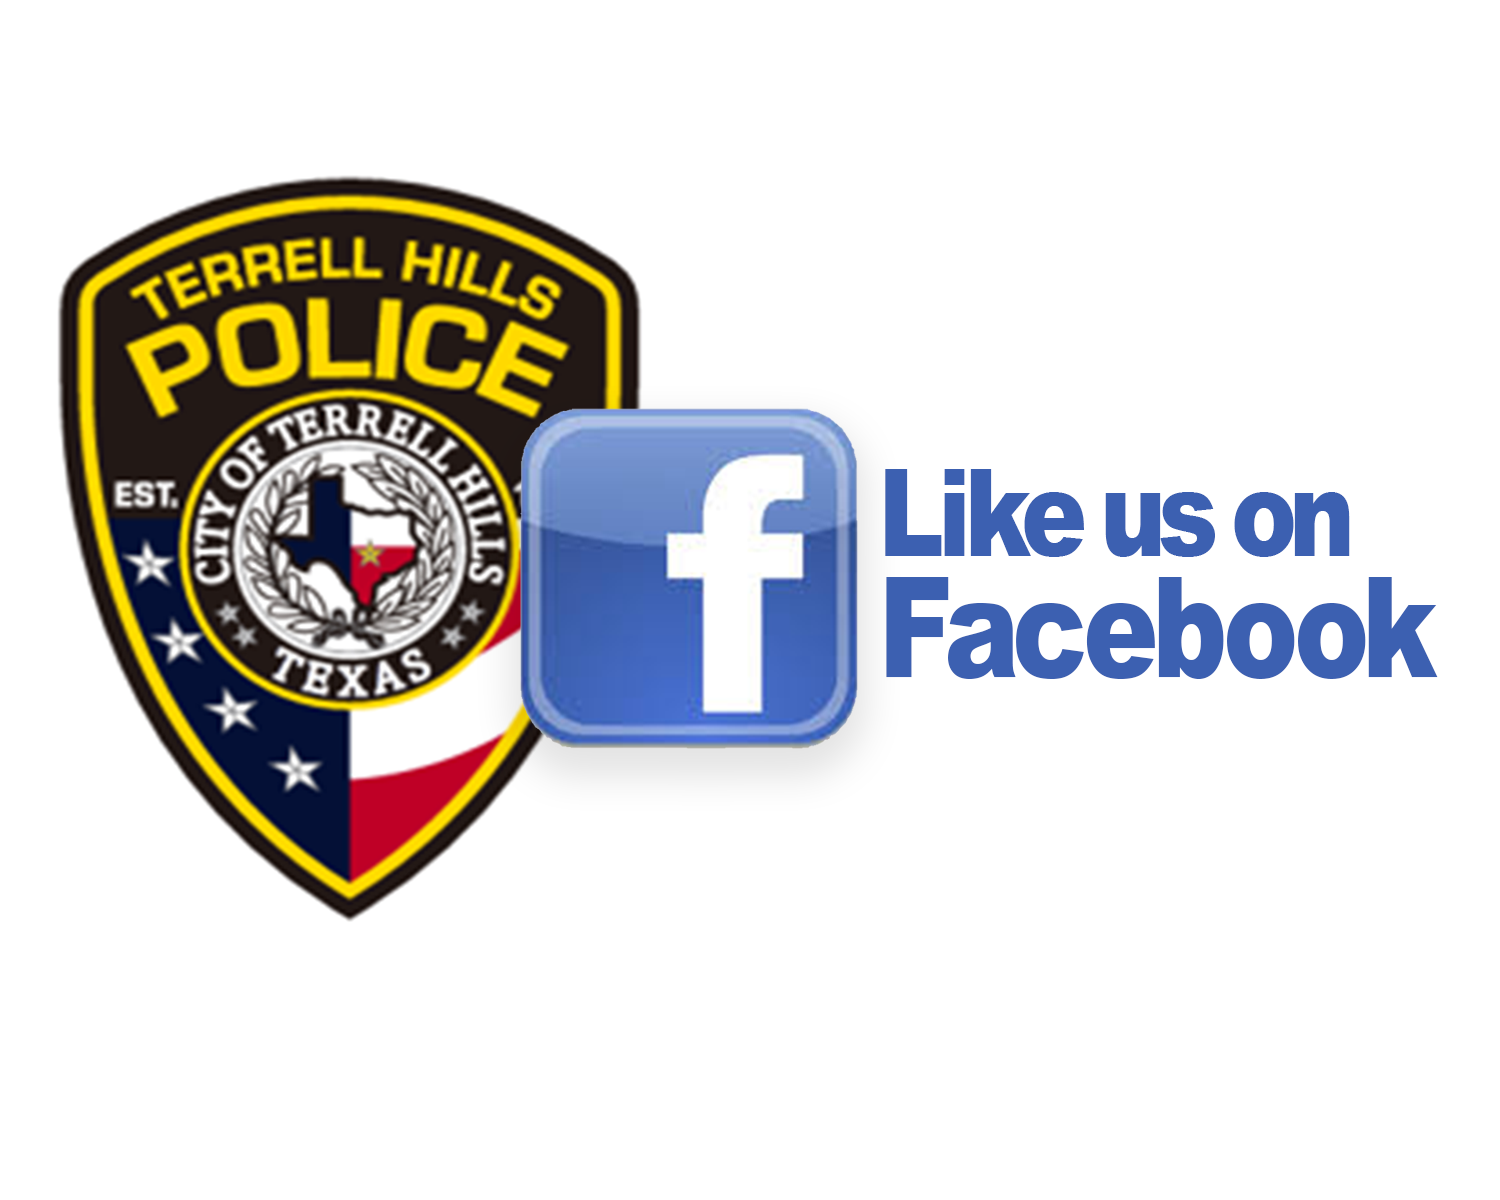 Visit the Terrell Hills Police Department Facebook page